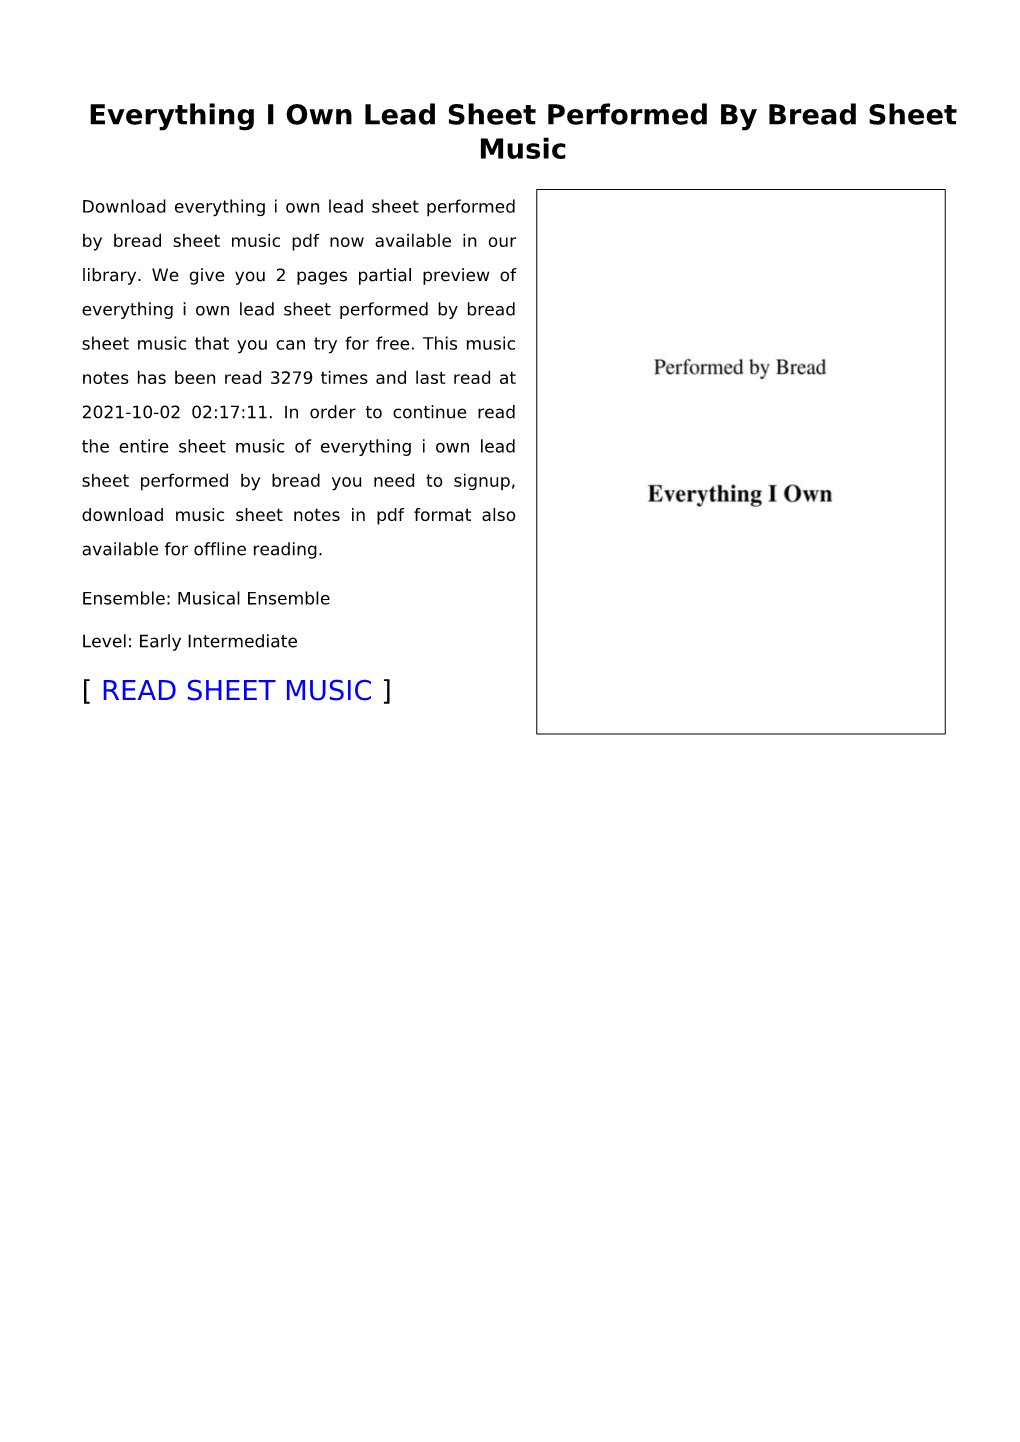 Everything I Own Lead Sheet Performed by Bread Sheet Music